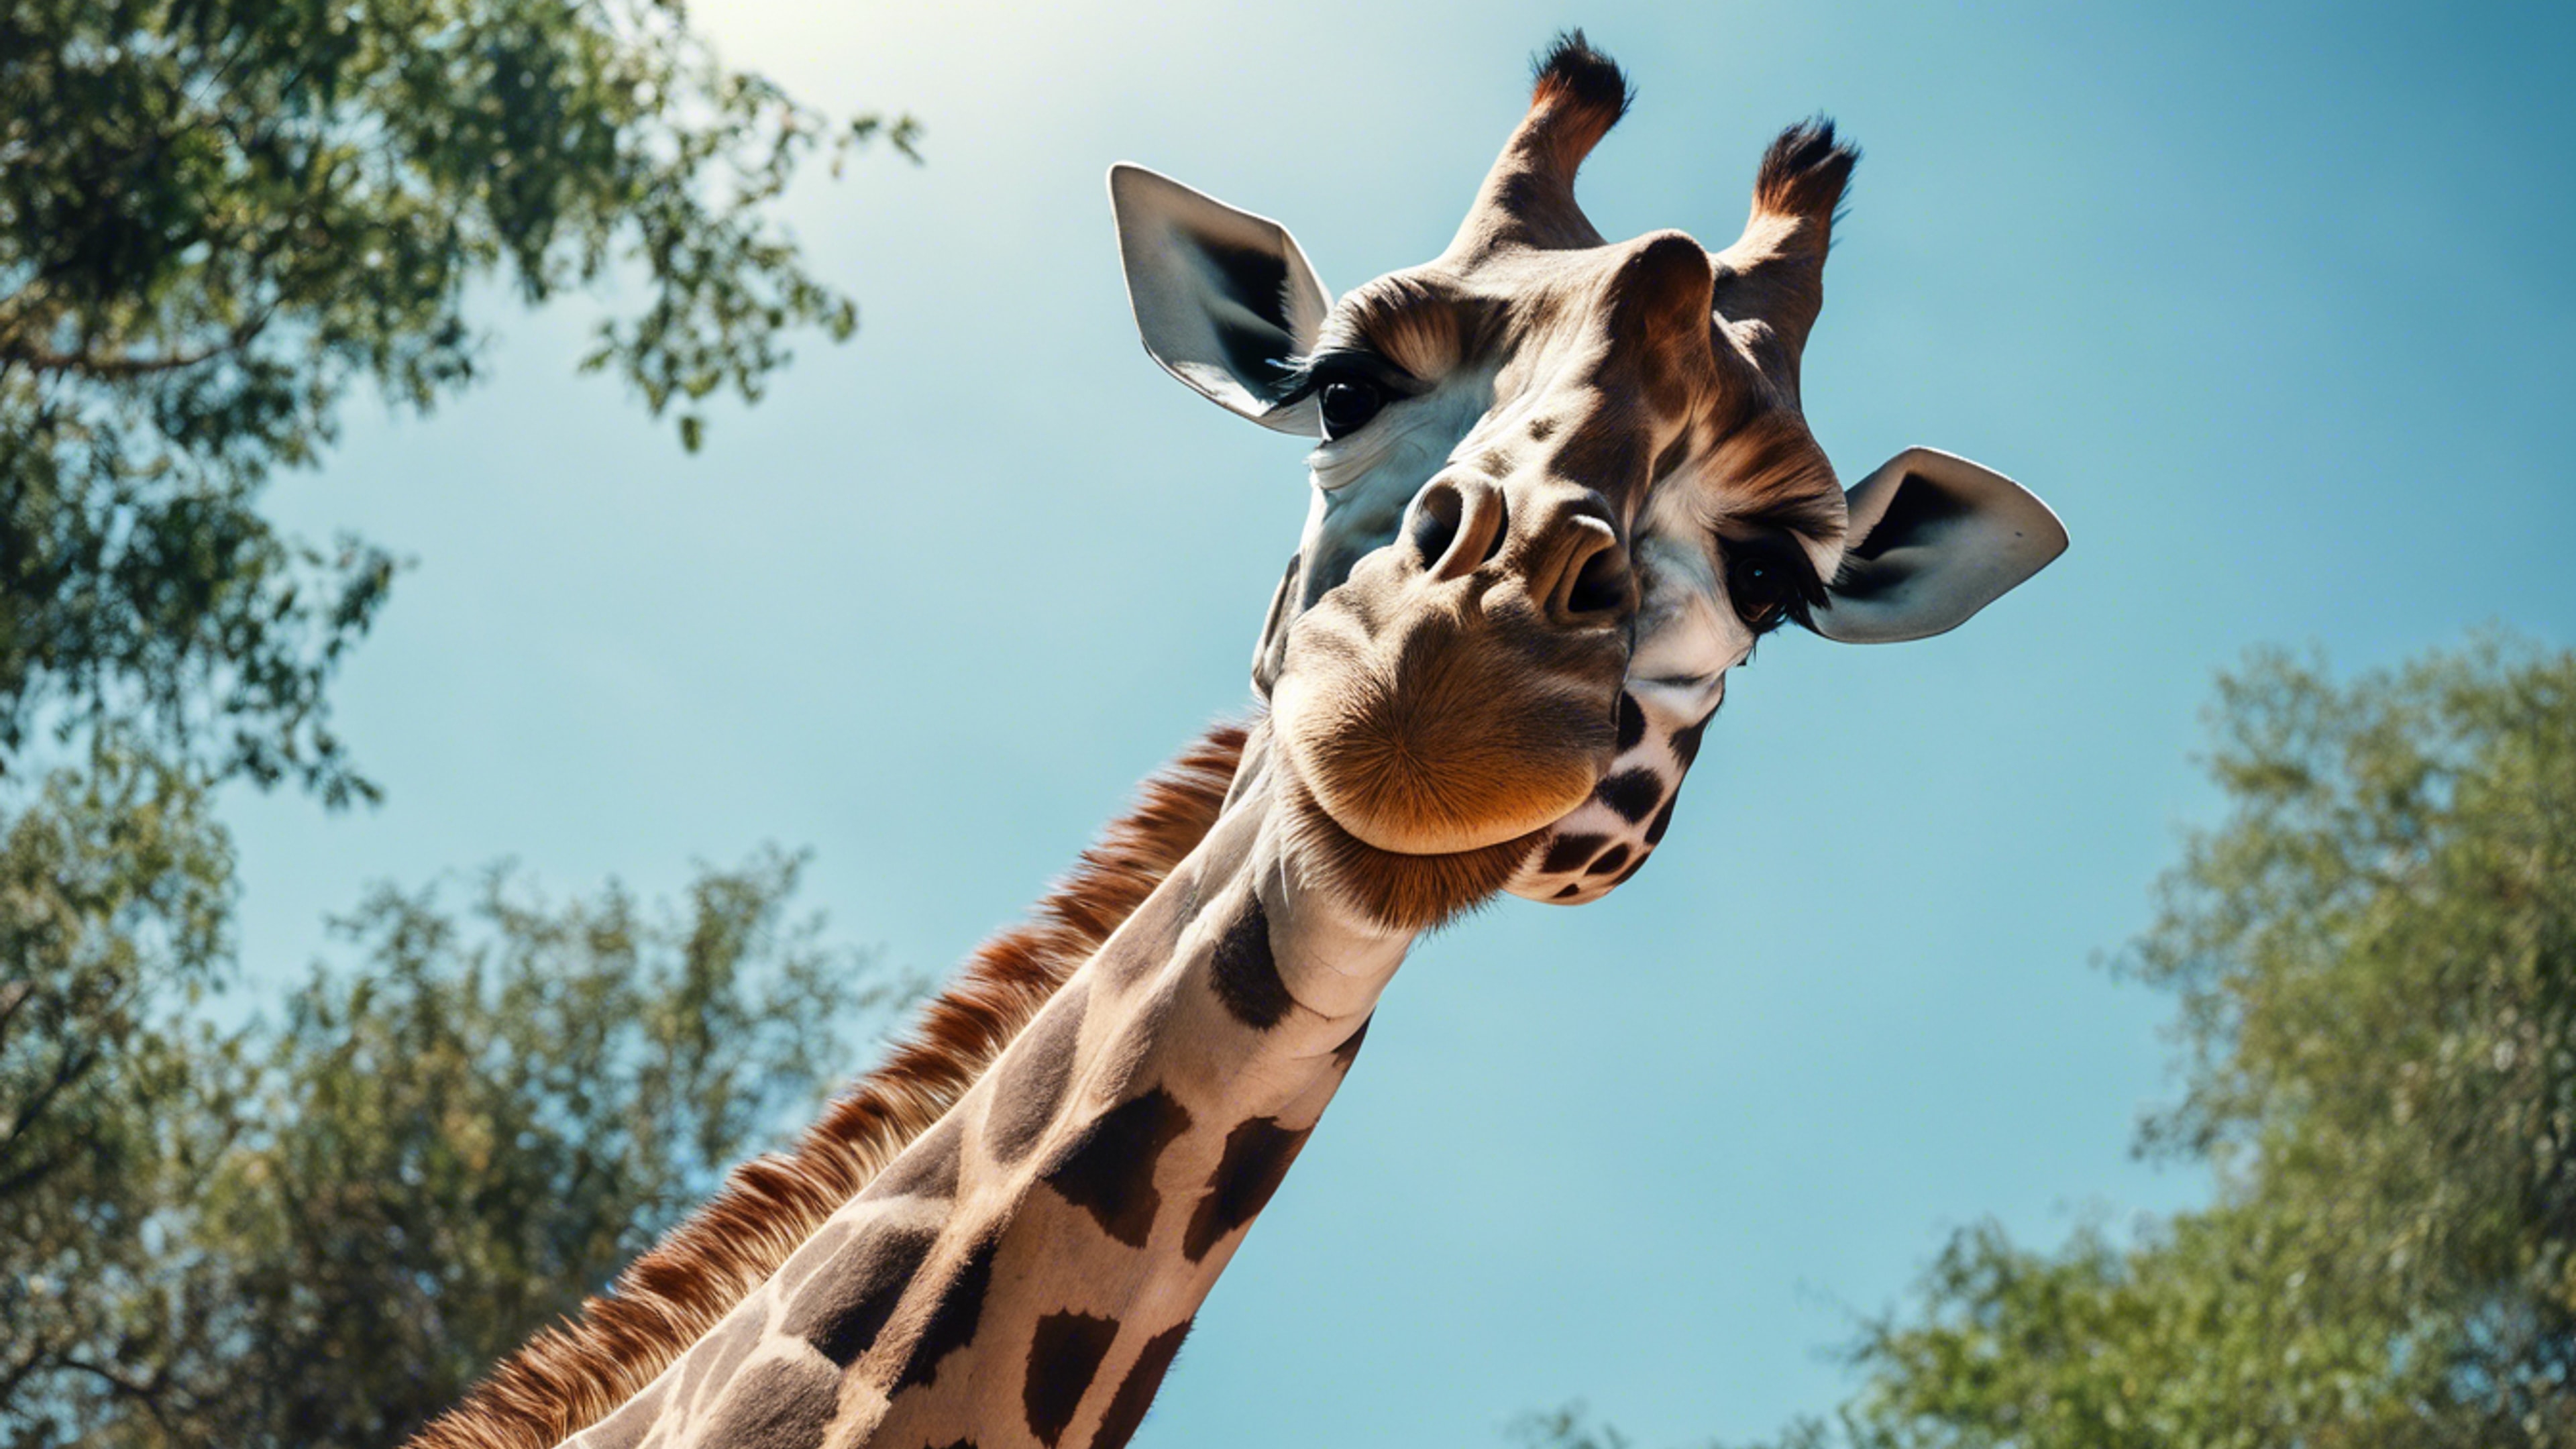 A picture from a below angle showing the towering magnificence of a giraffe against a clear blue sky. Дэлгэцийн зураг[8a88956d9aa2483bb204]